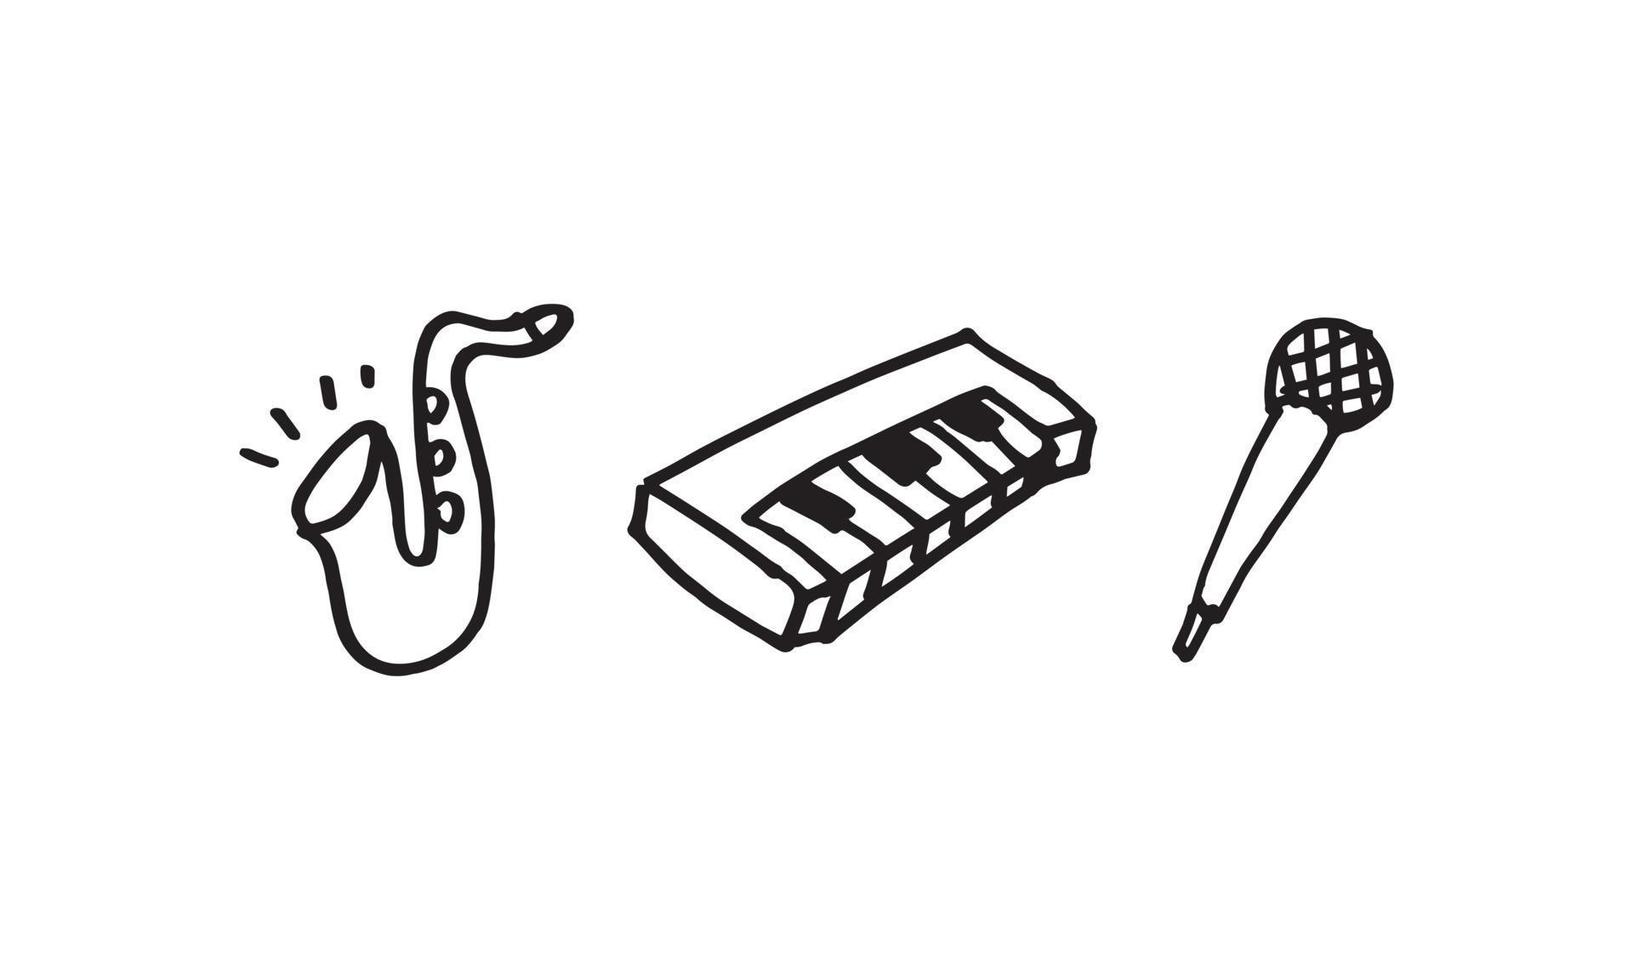 a hand drawn illustration of musical instrument and equipment. saxophone, keyboard, and microphone. simple doodle icon illustration in vector for decorating any design.